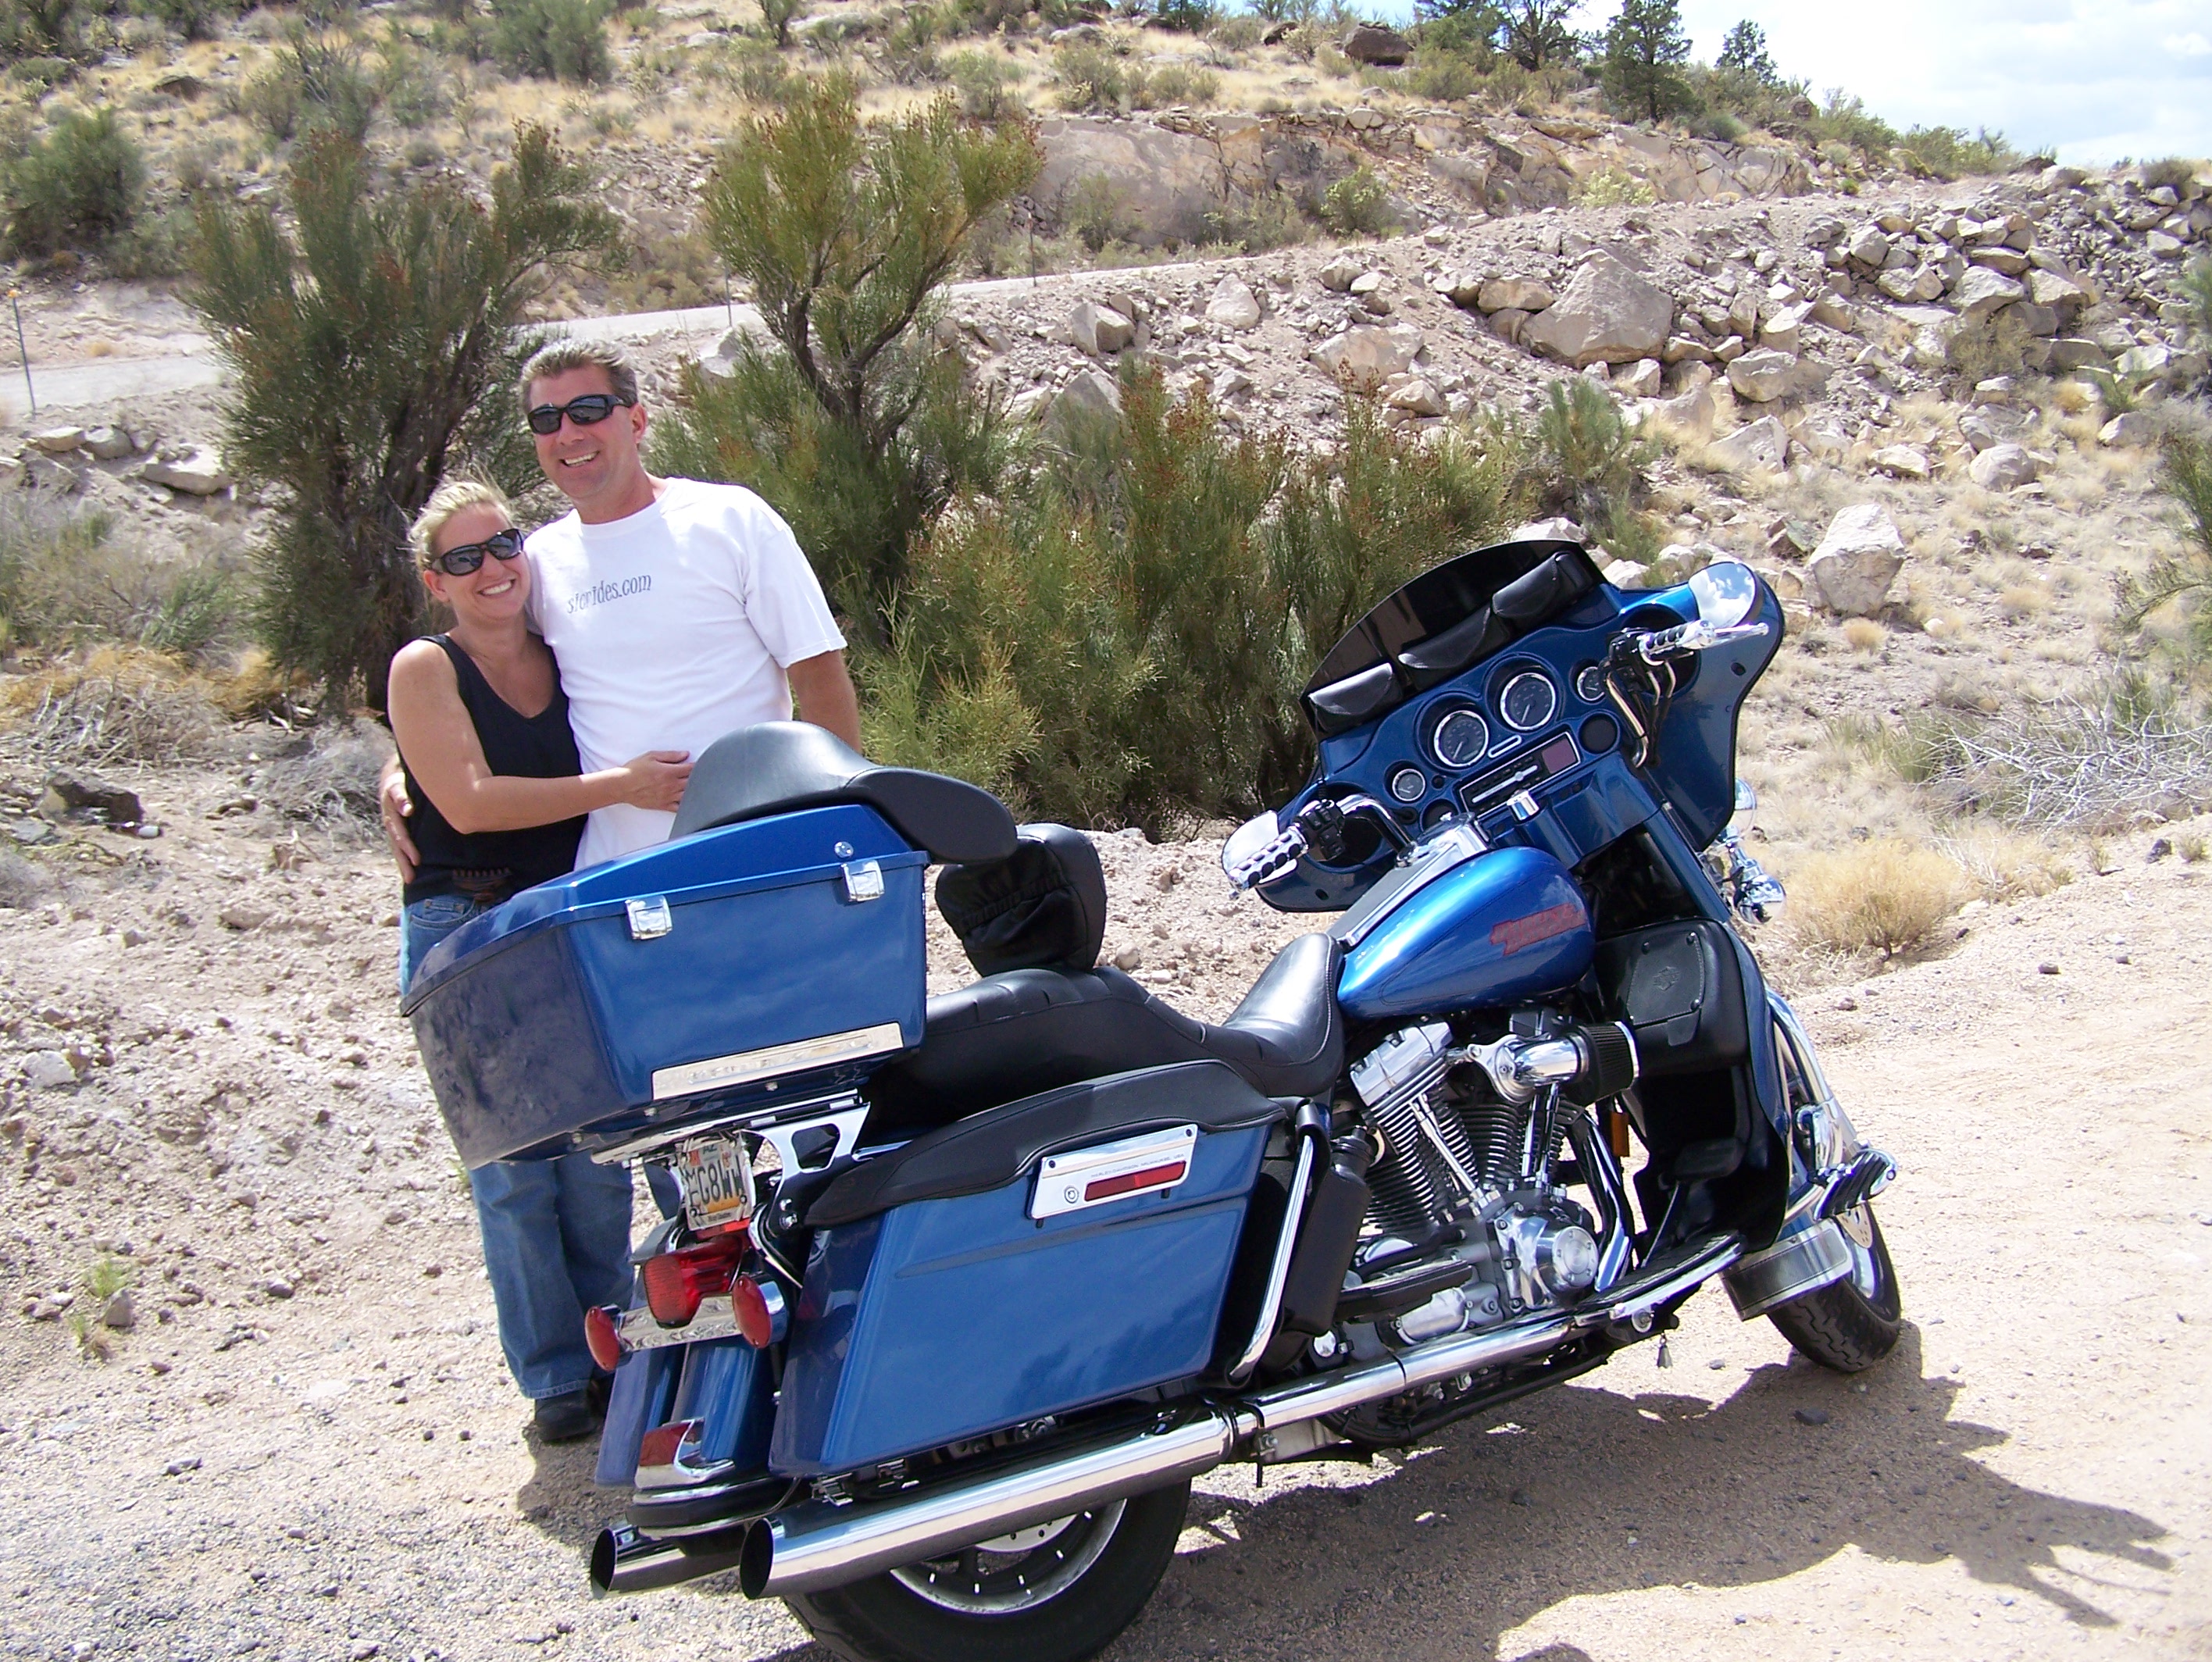 THE POWERSPORT INSTITUTE OFFERS AMERICAN V-TWIN PROGRAM